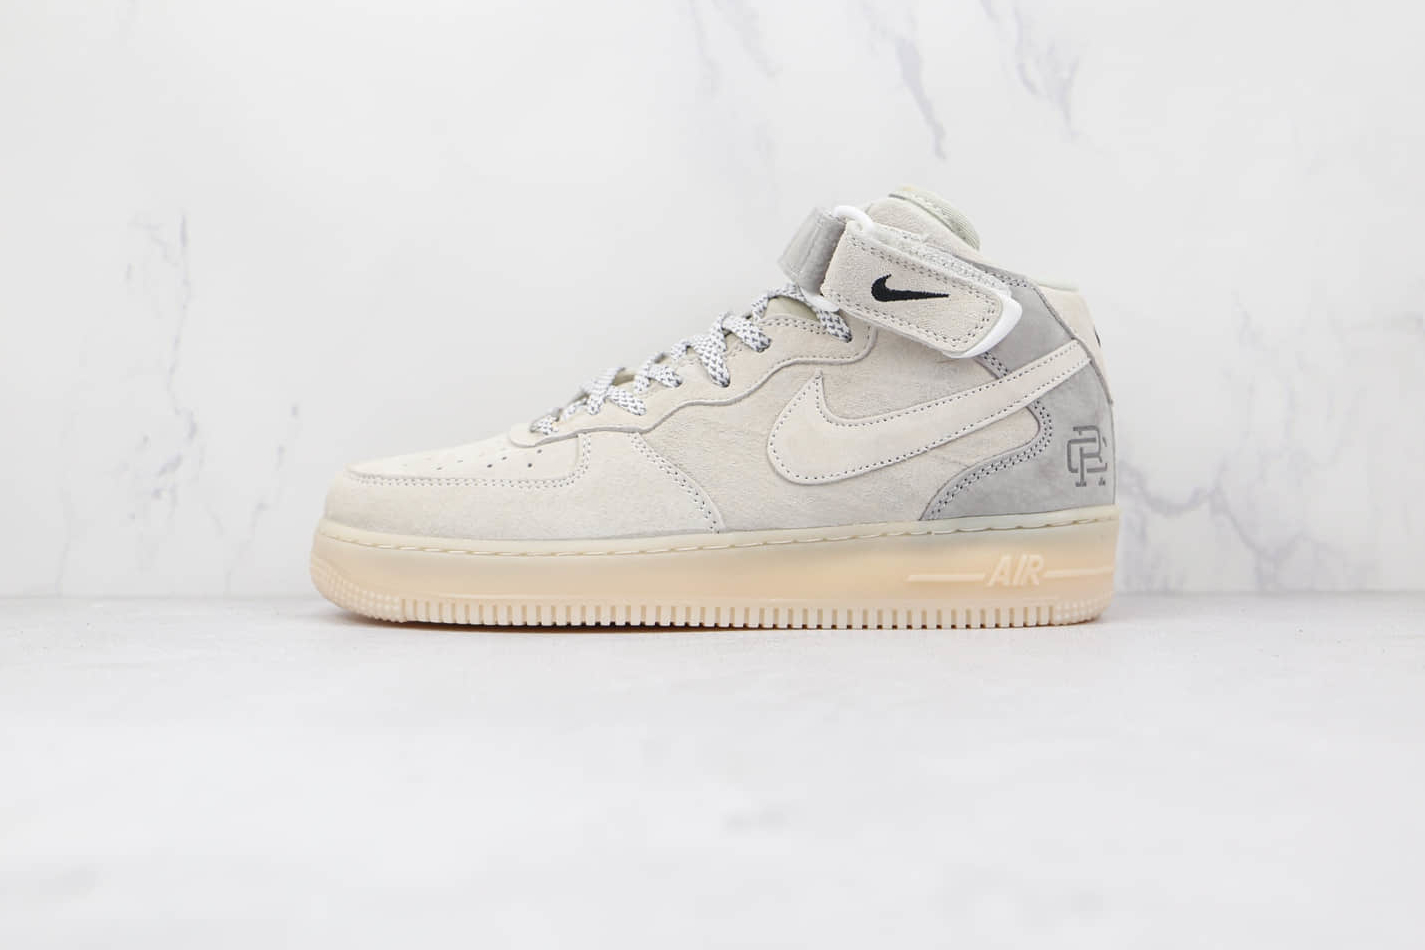 Nike Air Force 1 X Reigning Champ White Grey Black 807618-300 - Premium Mid-top Sneakers for Sale